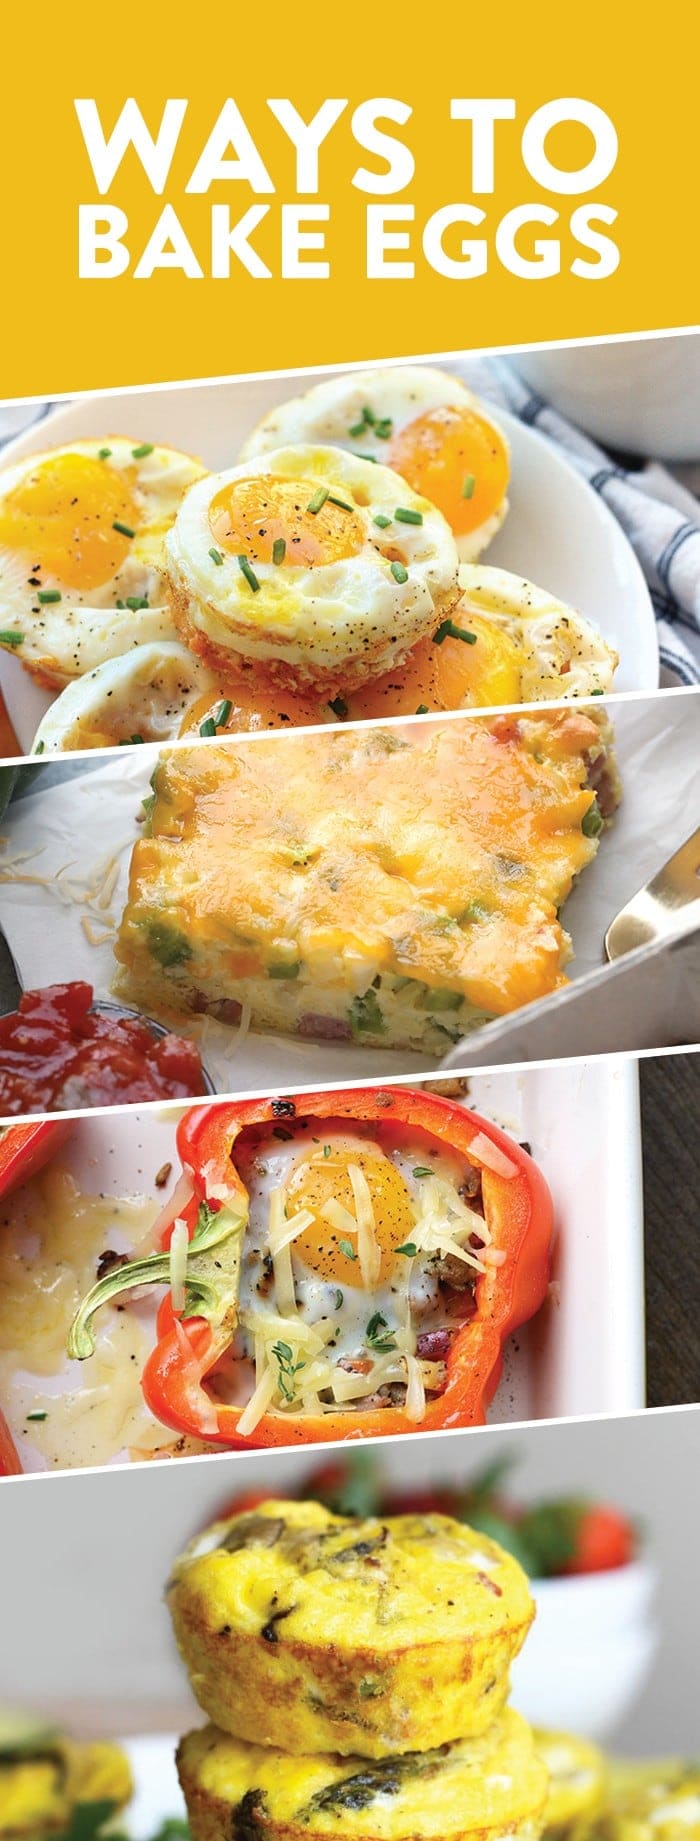 Easy and Healthy Ways to Bake Eggs in the Oven from Fit Foodie Finds!